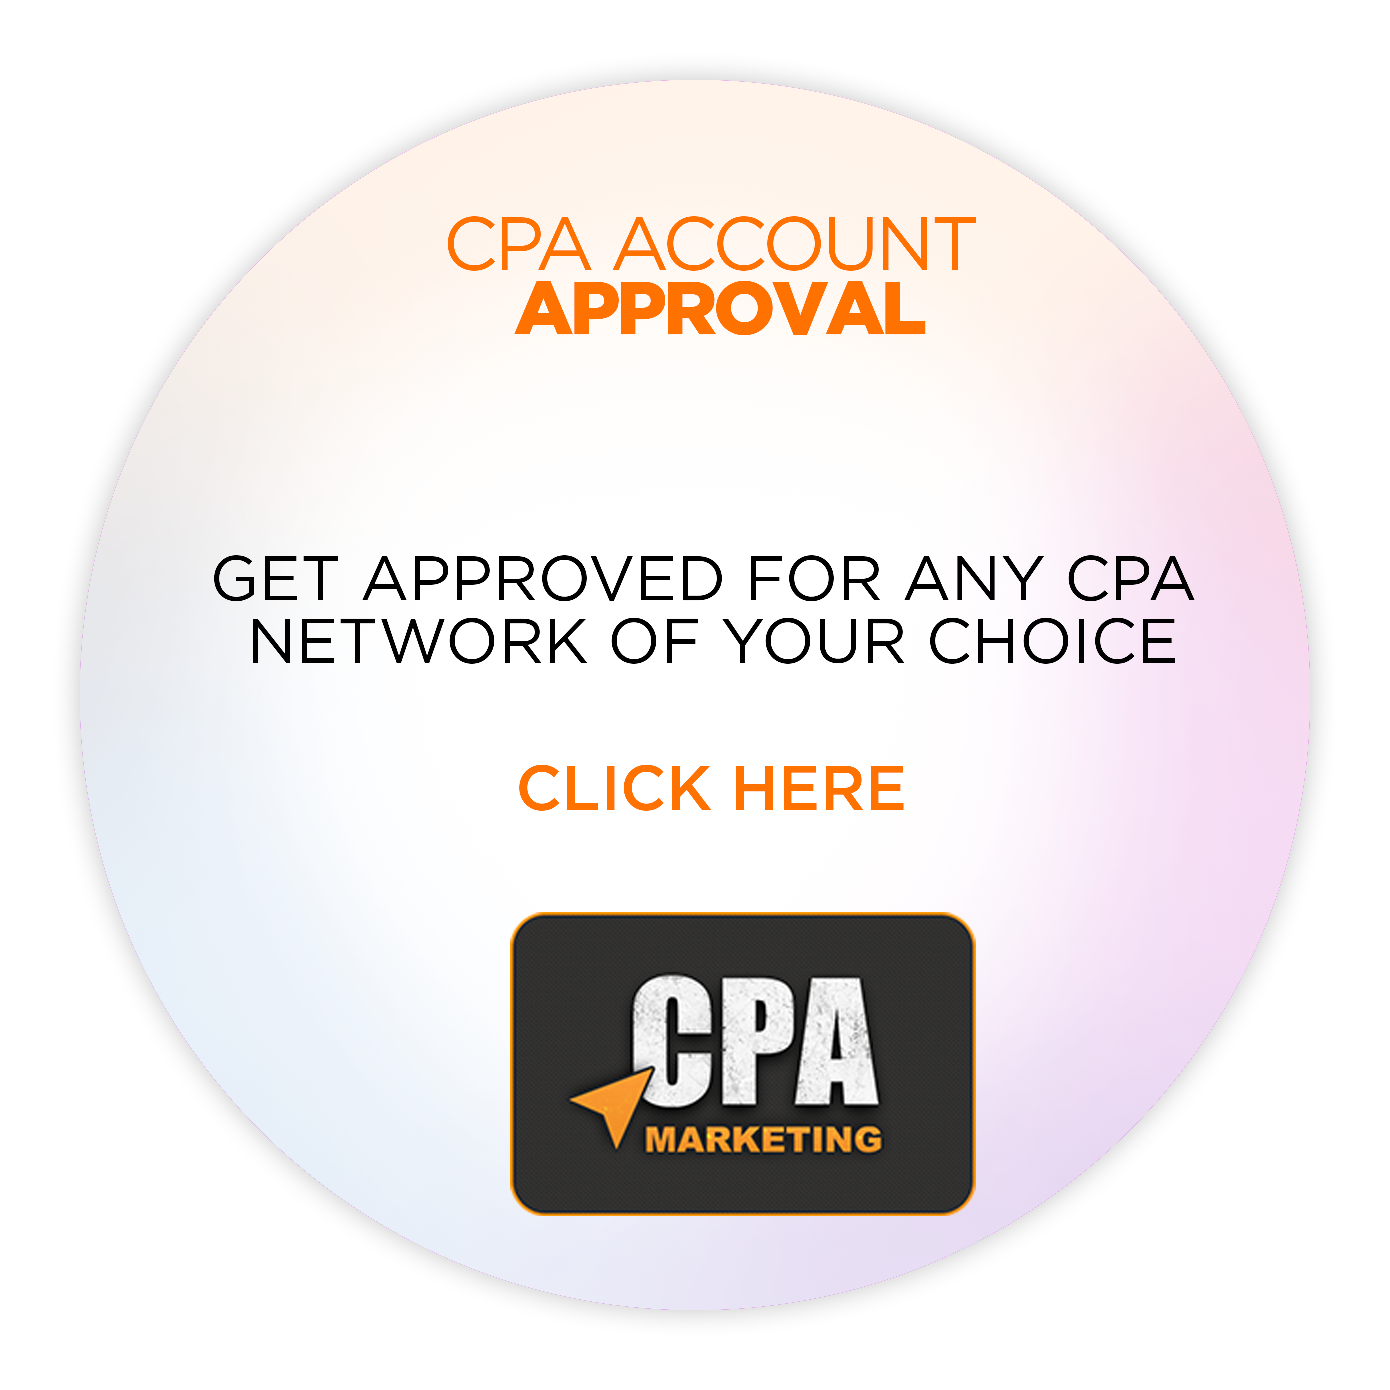 CPA ACCOUNT APPROVAL